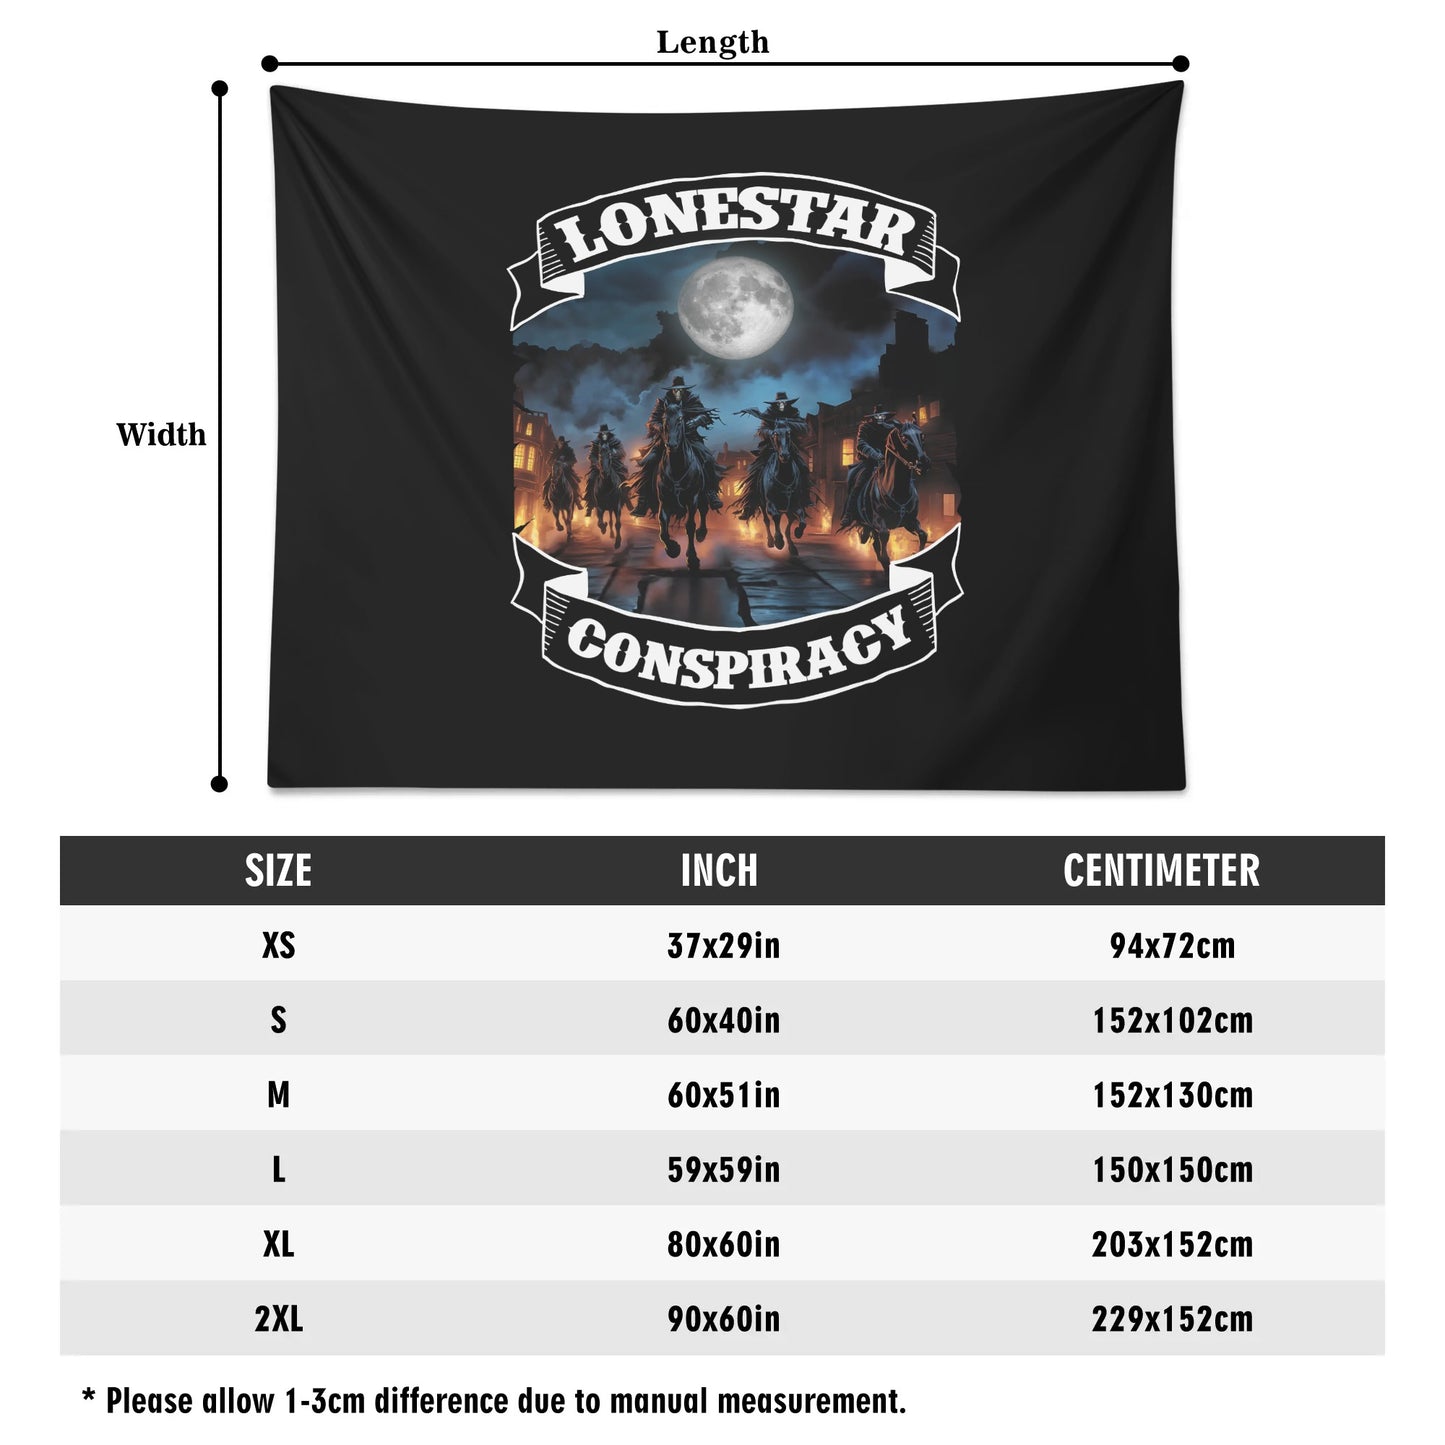 Lonestar Conspiracy Polyester Peach Skin Wall Tapestry 6 Sizes